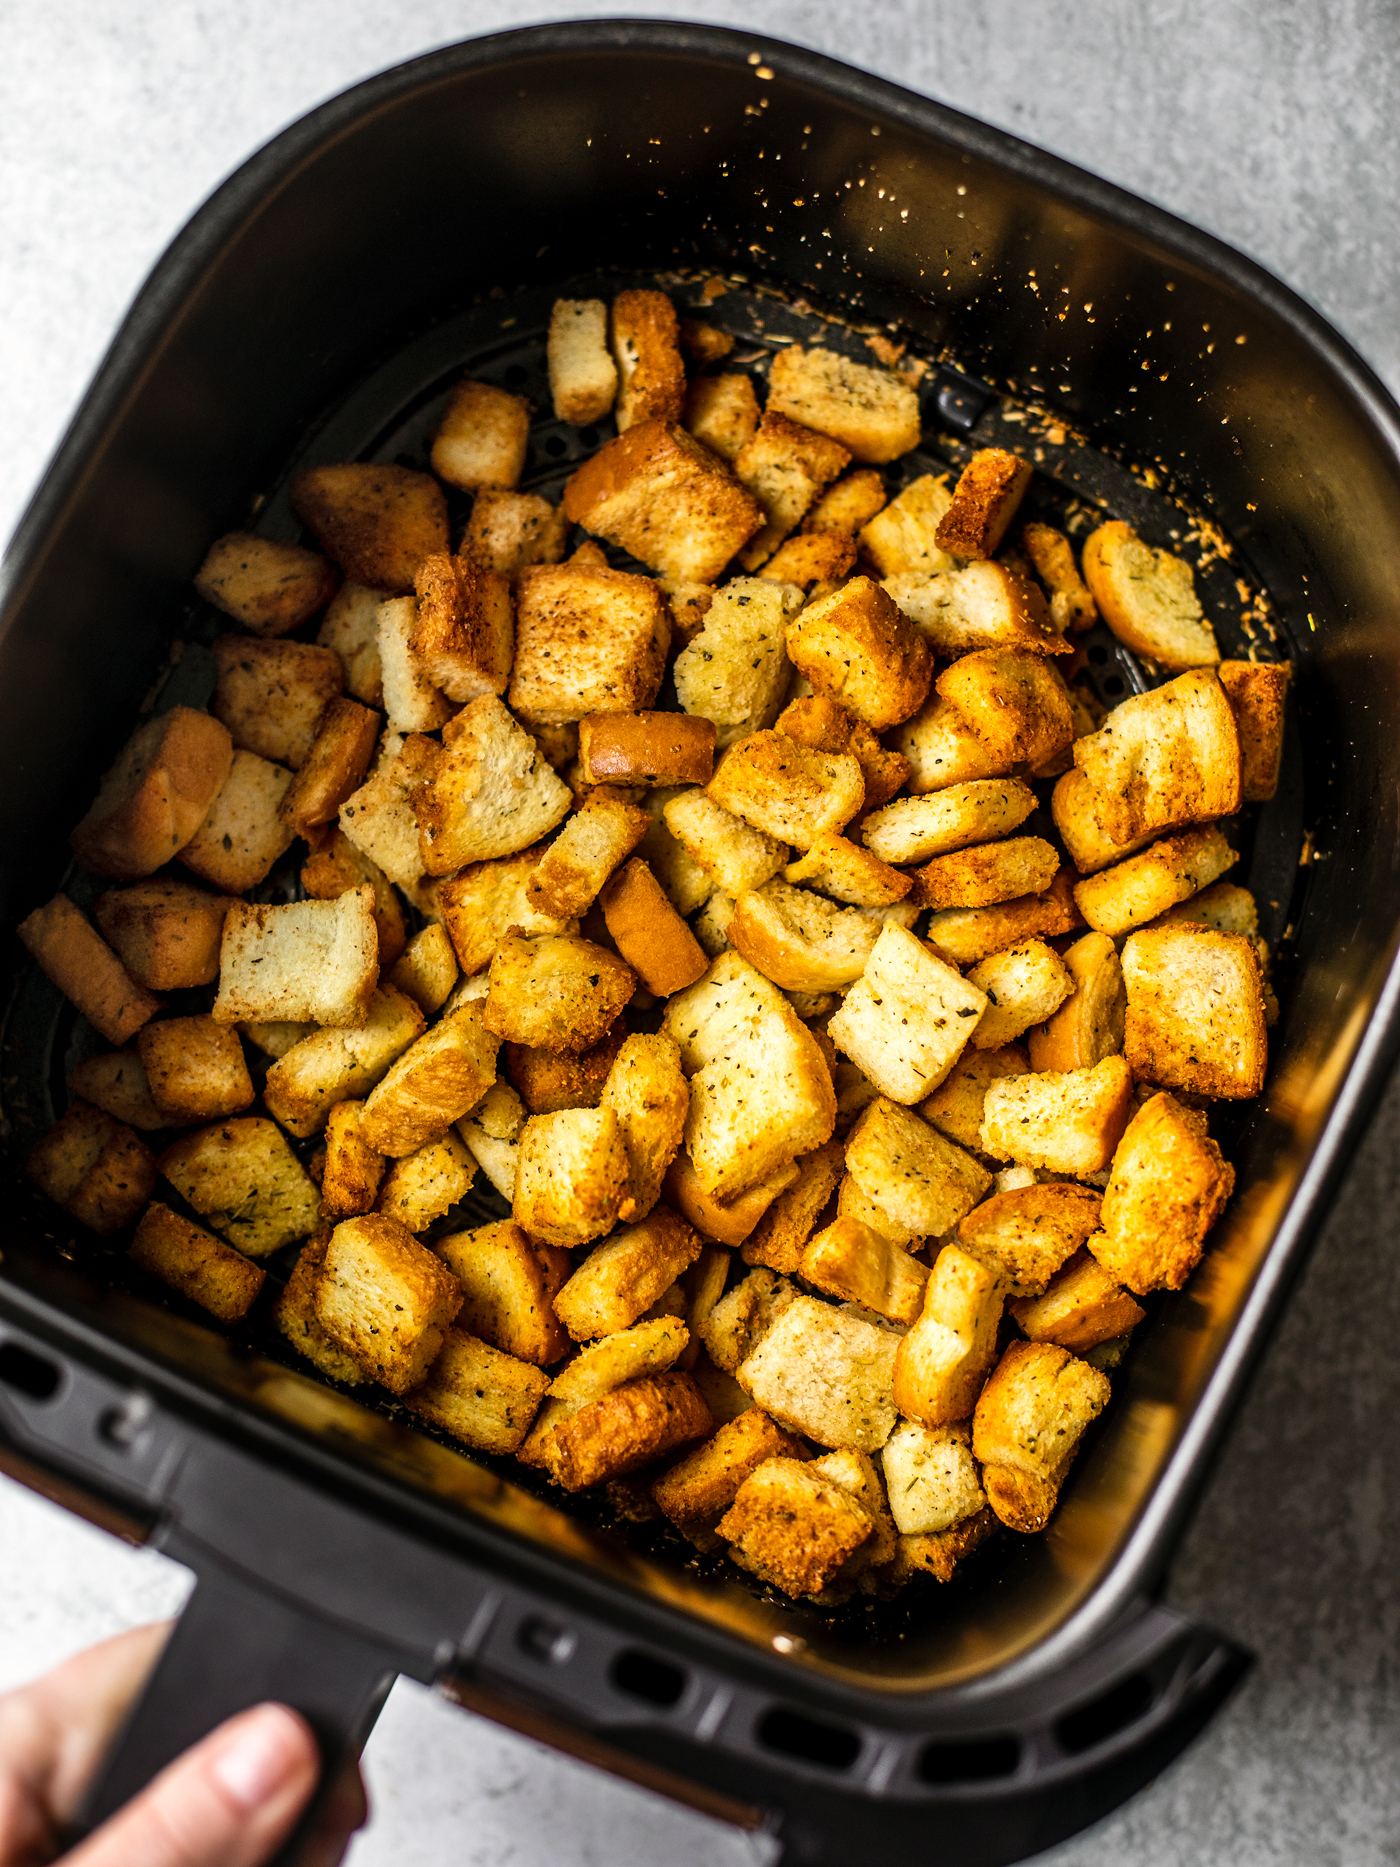 Air fryer full of toasted croutons.